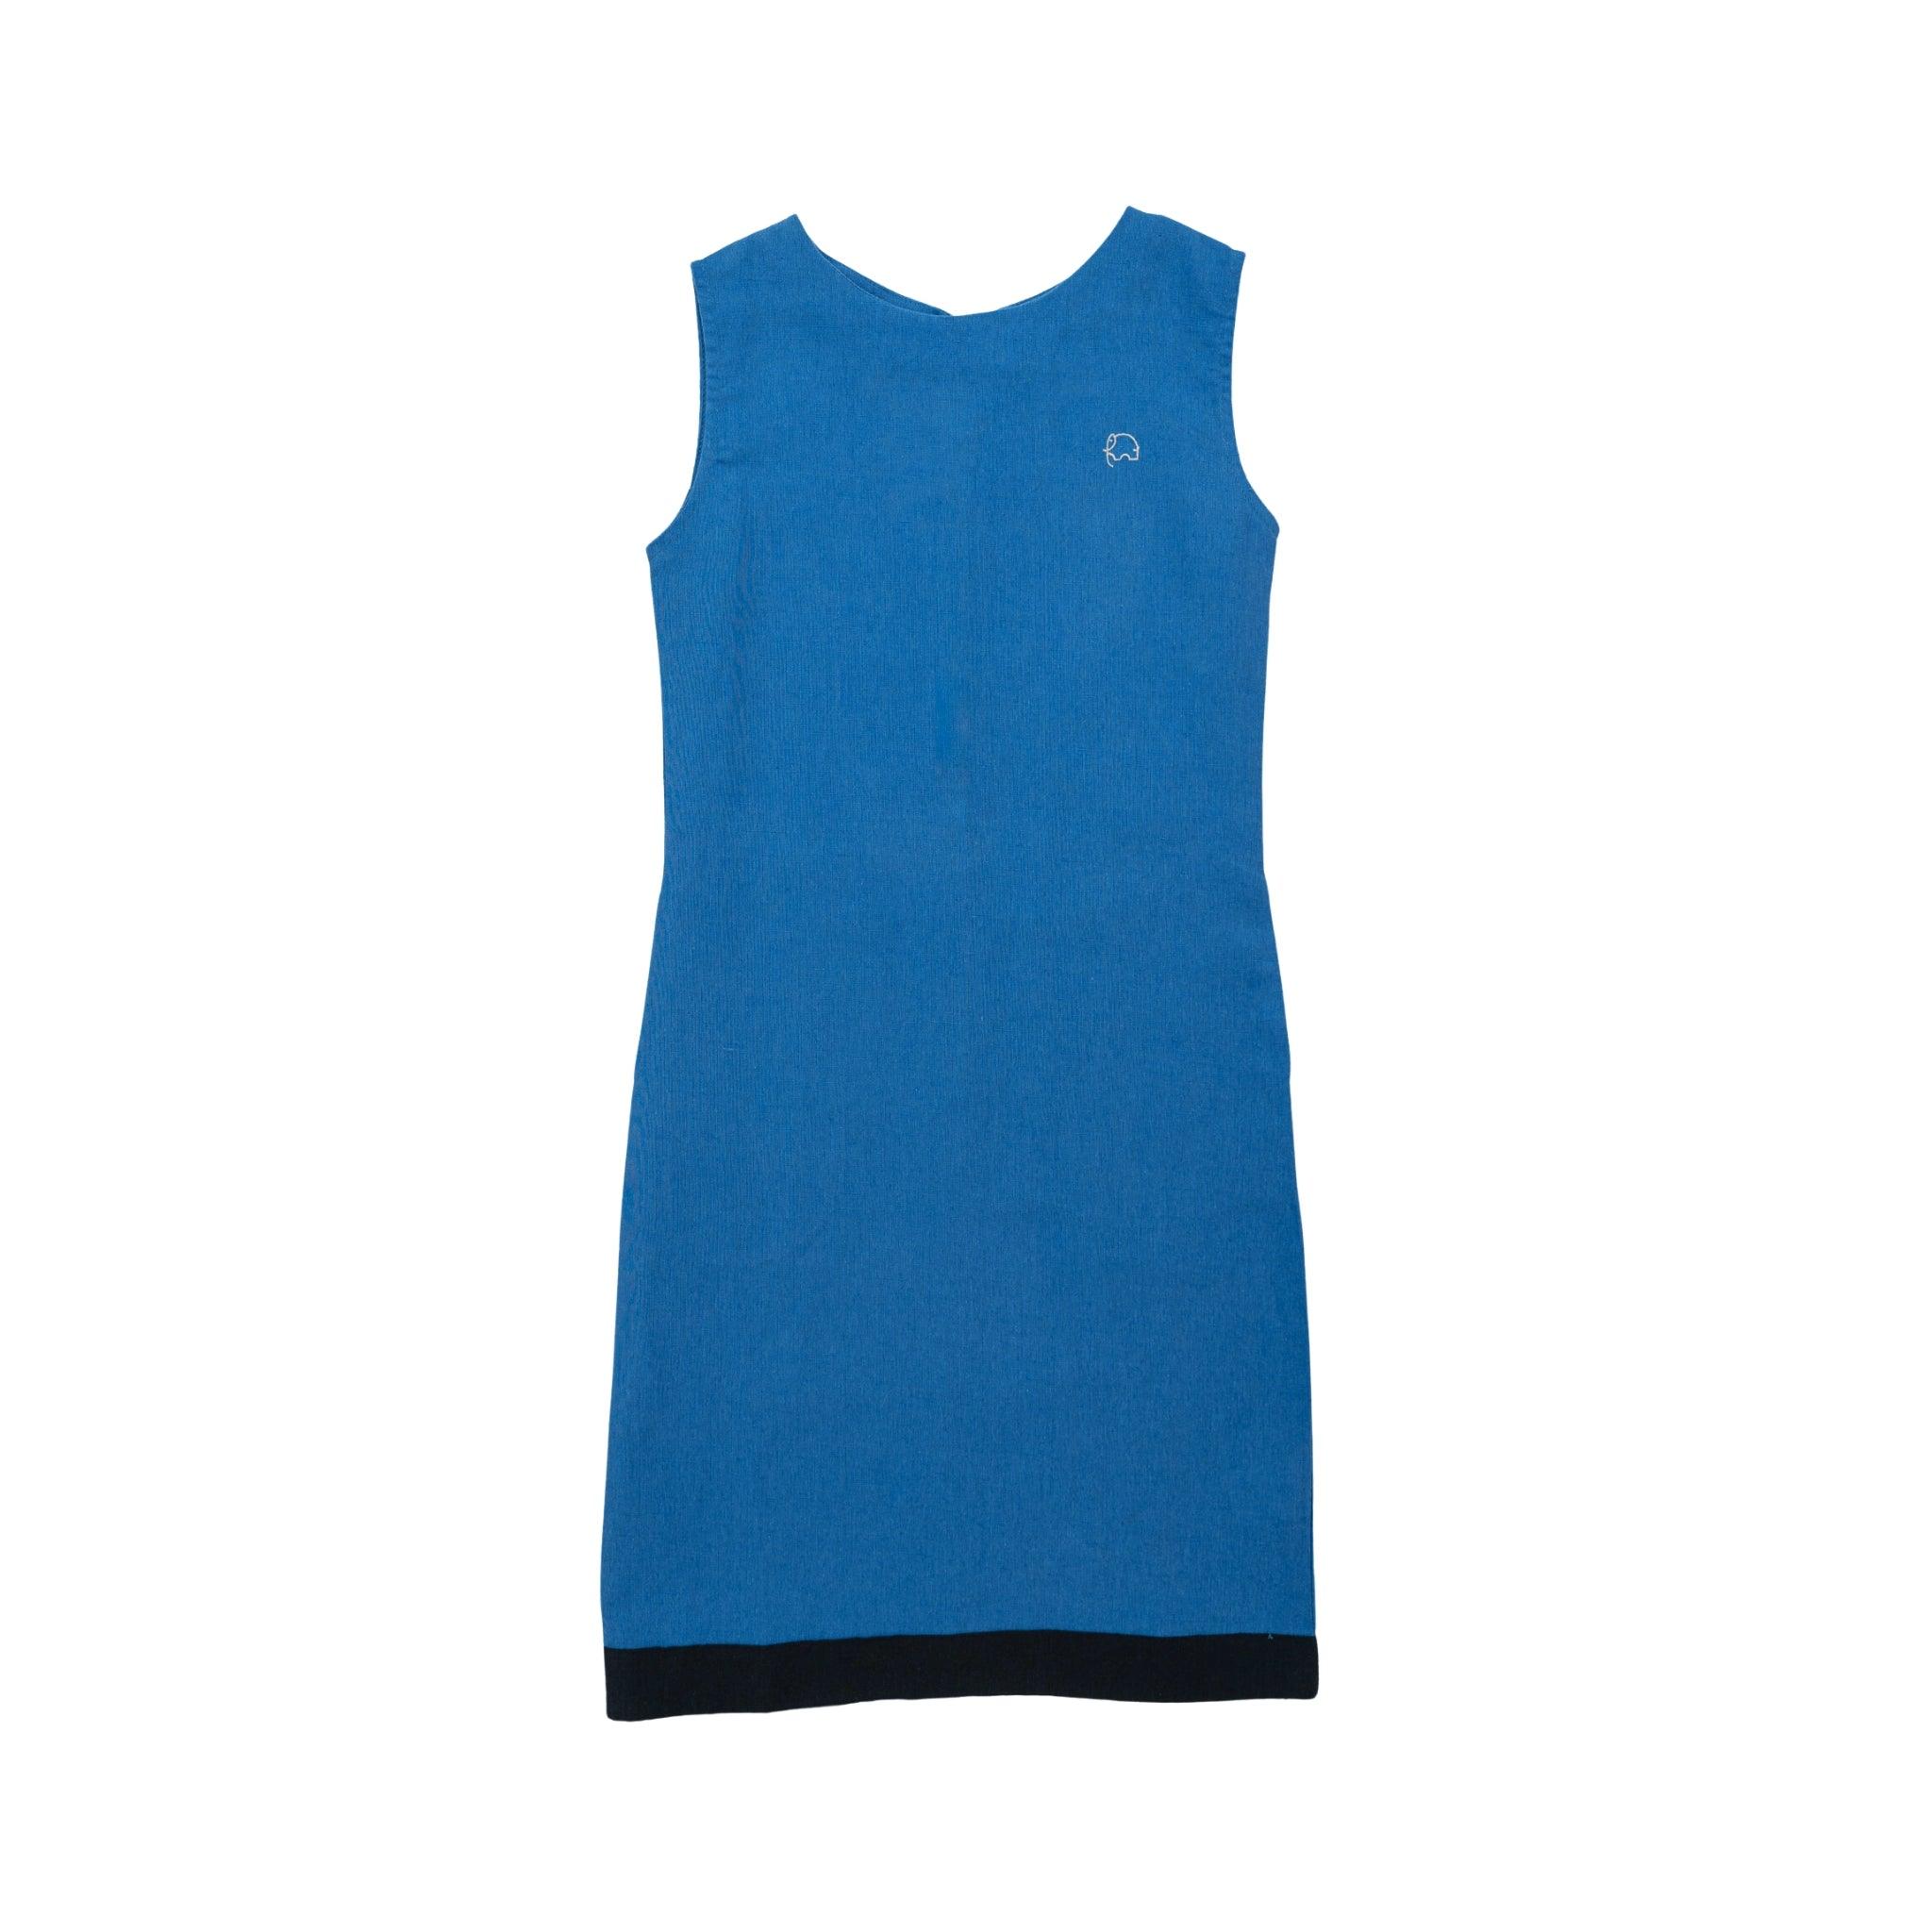 A Karee Linen Cotton Round Neck Frock for Kids with a darker blue trim at the hem, displayed against a white background.